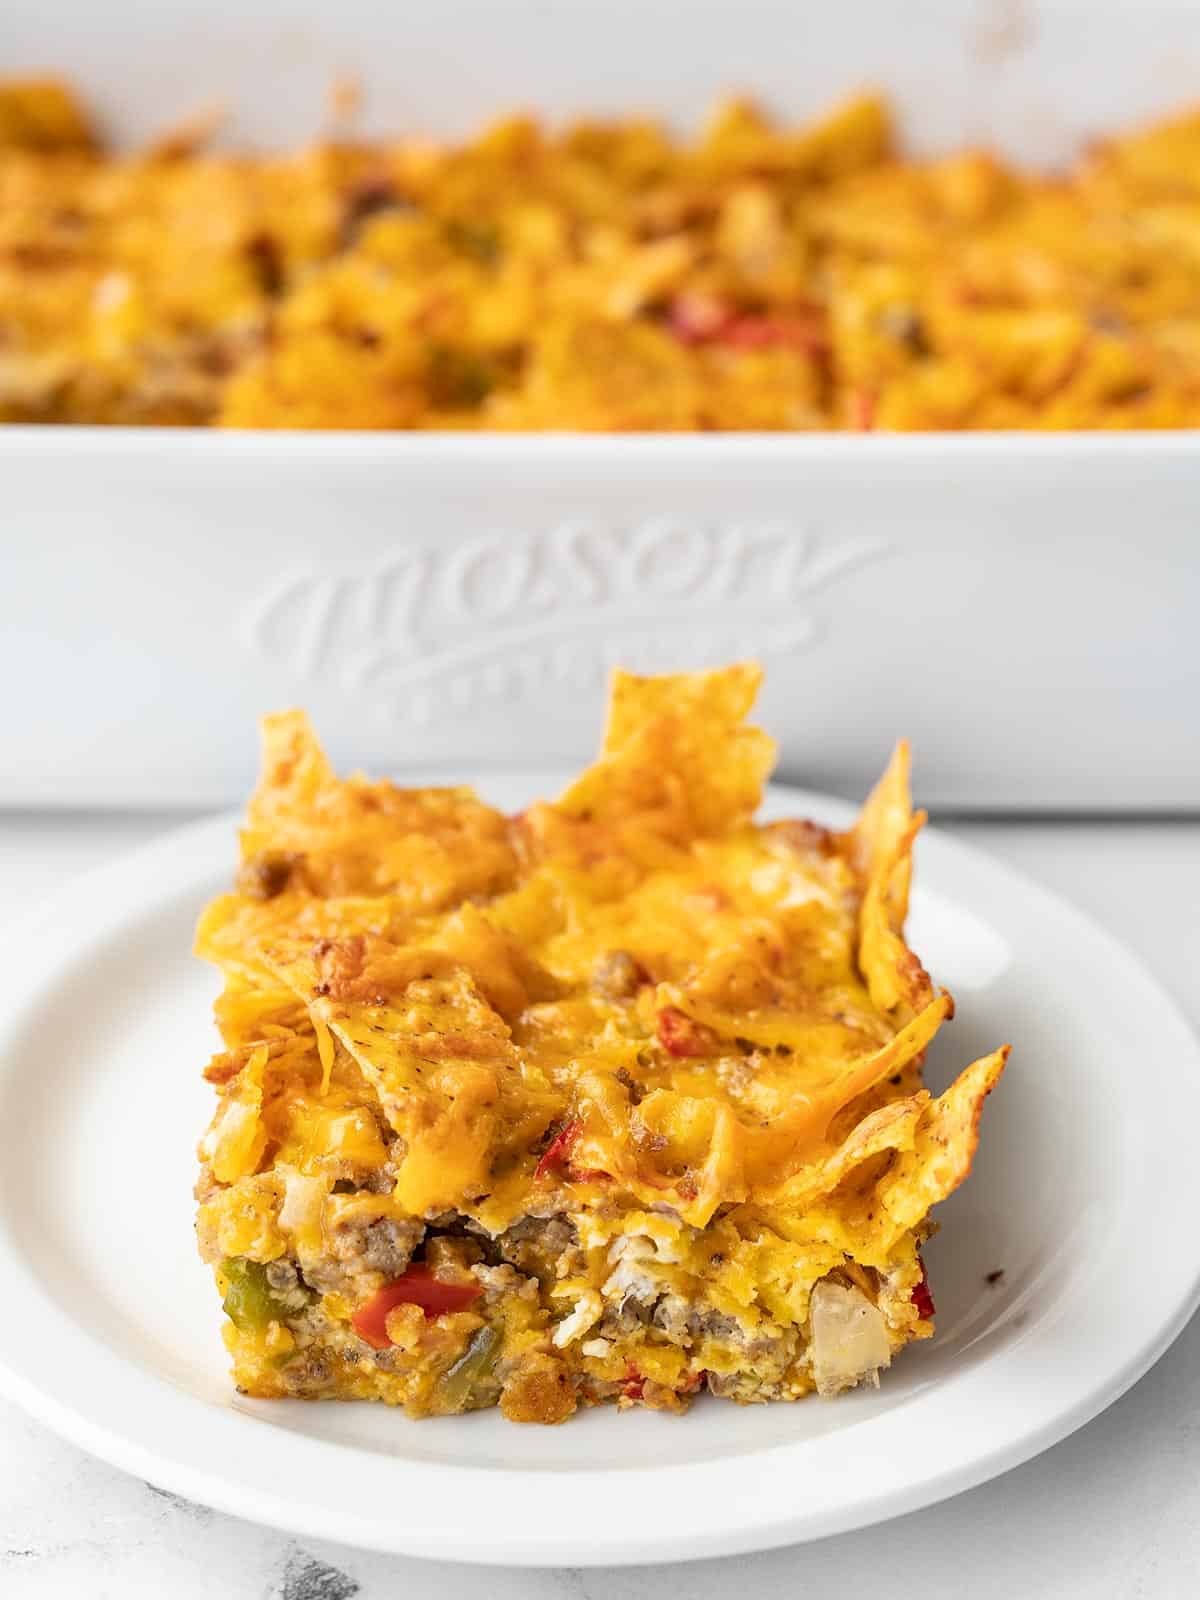 A slice of breakfast casserole on a plate in front of the casserole dish